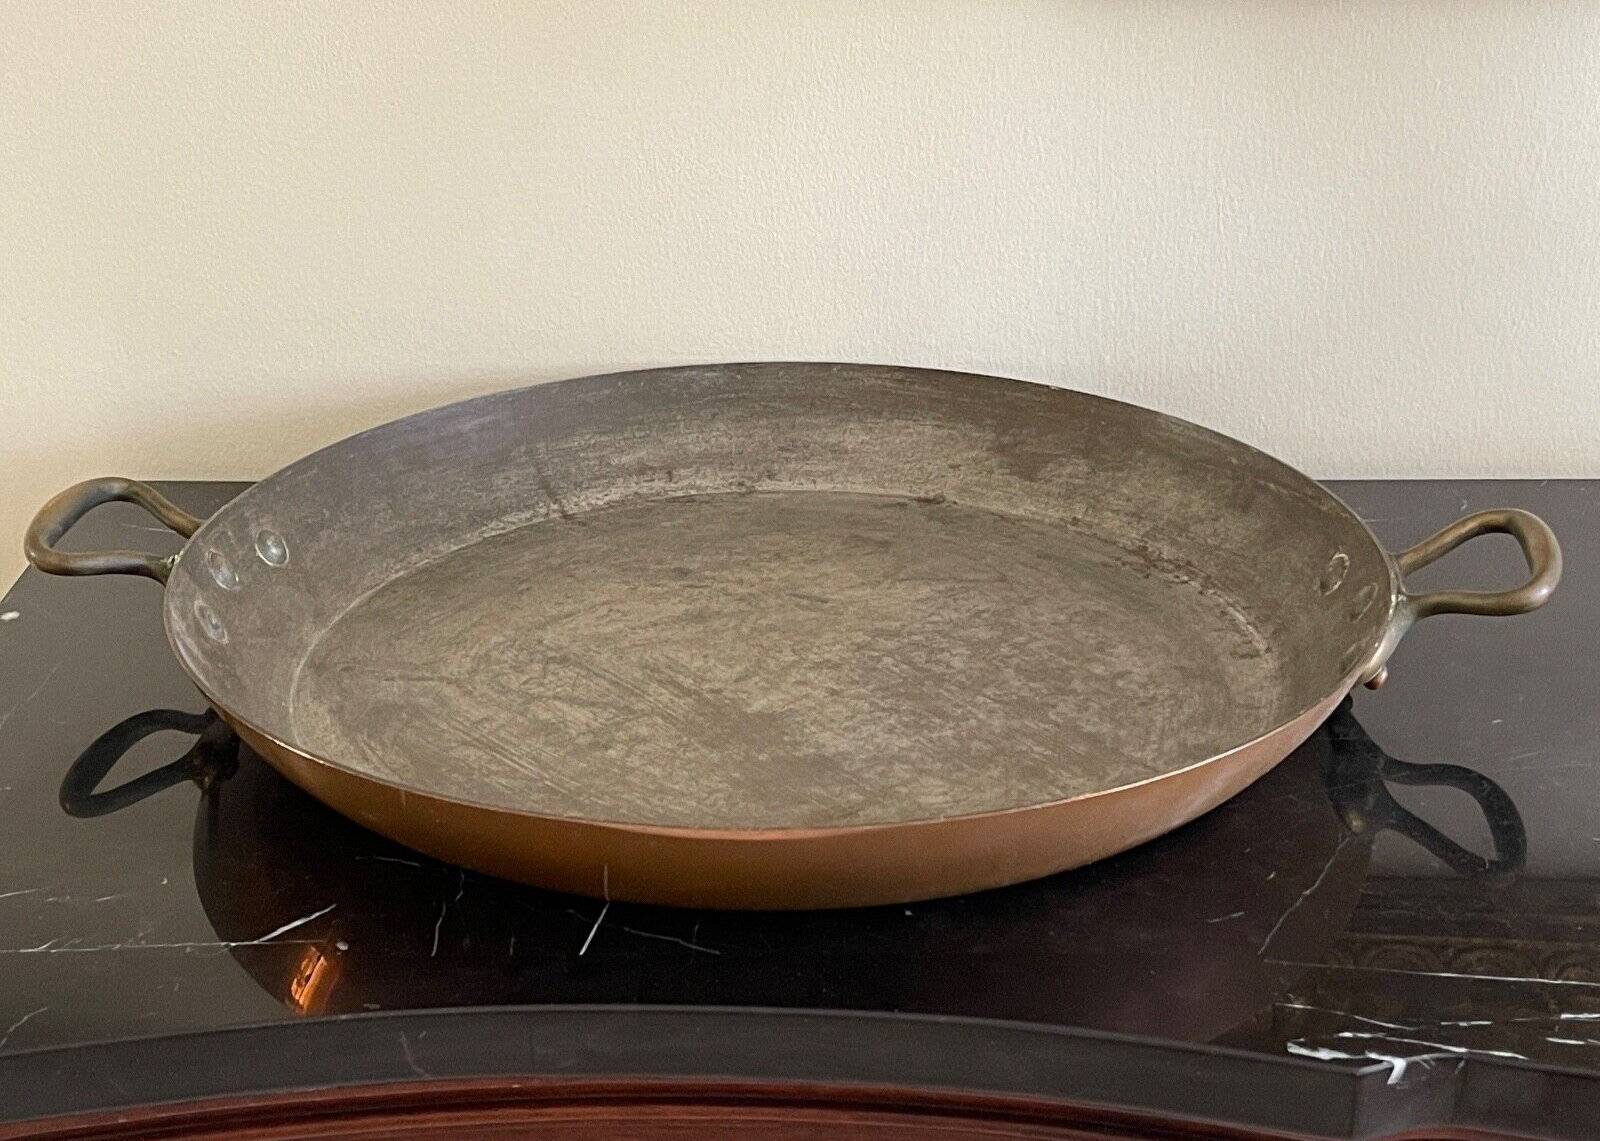 13-Inch Paella Skillet, Polished – Victoria SIGNATUREseries